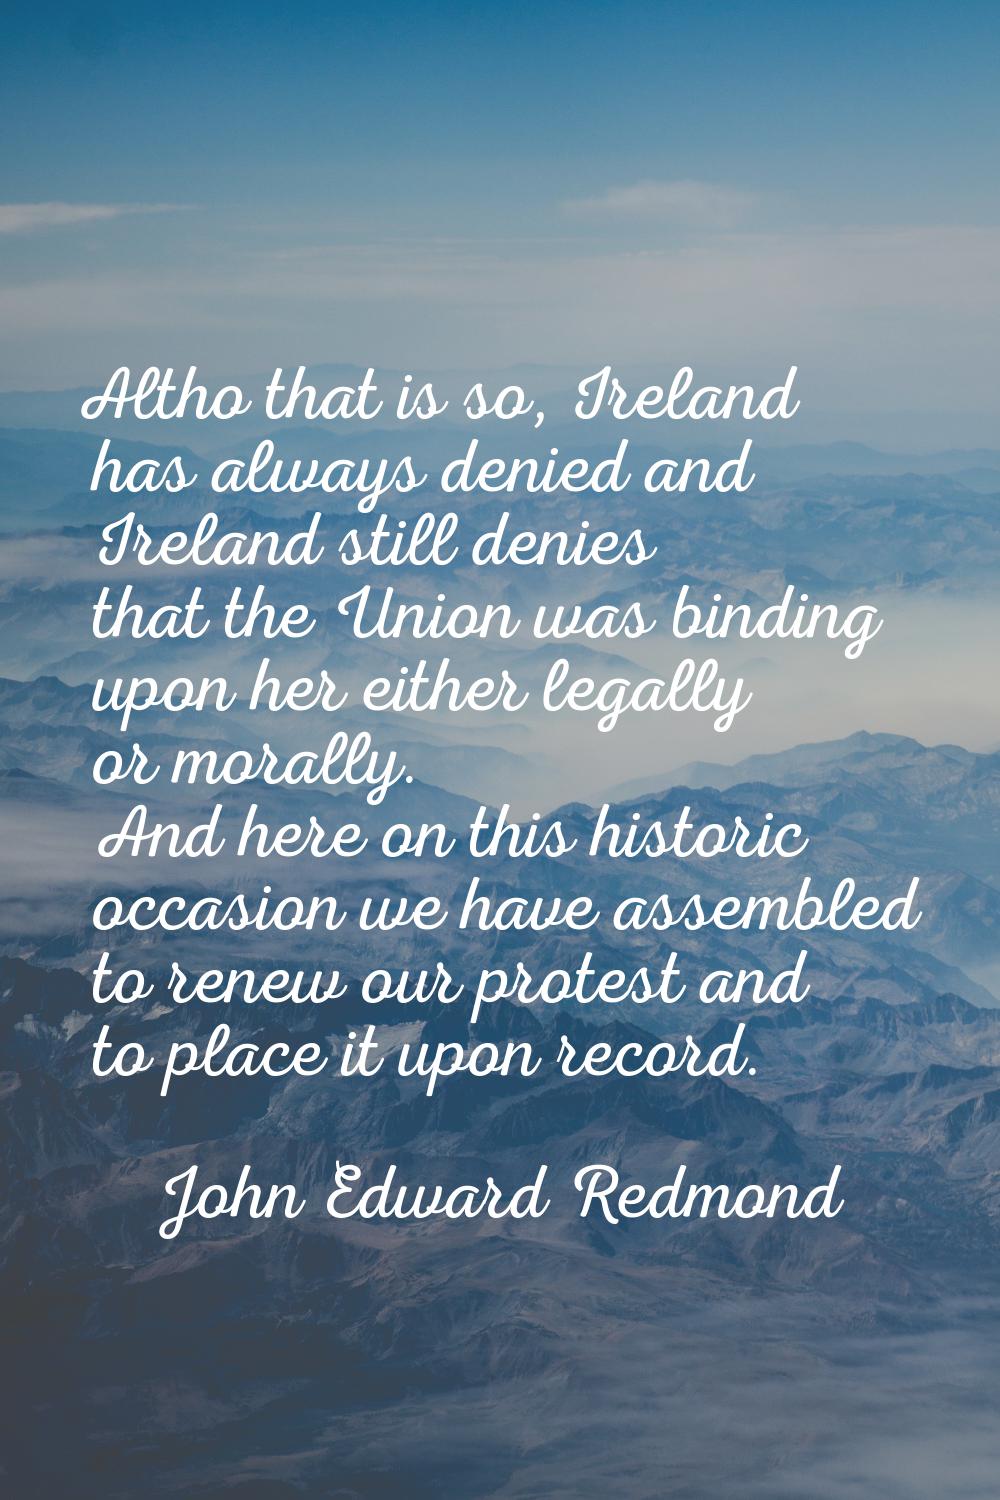 Altho that is so, Ireland has always denied and Ireland still denies that the Union was binding upo